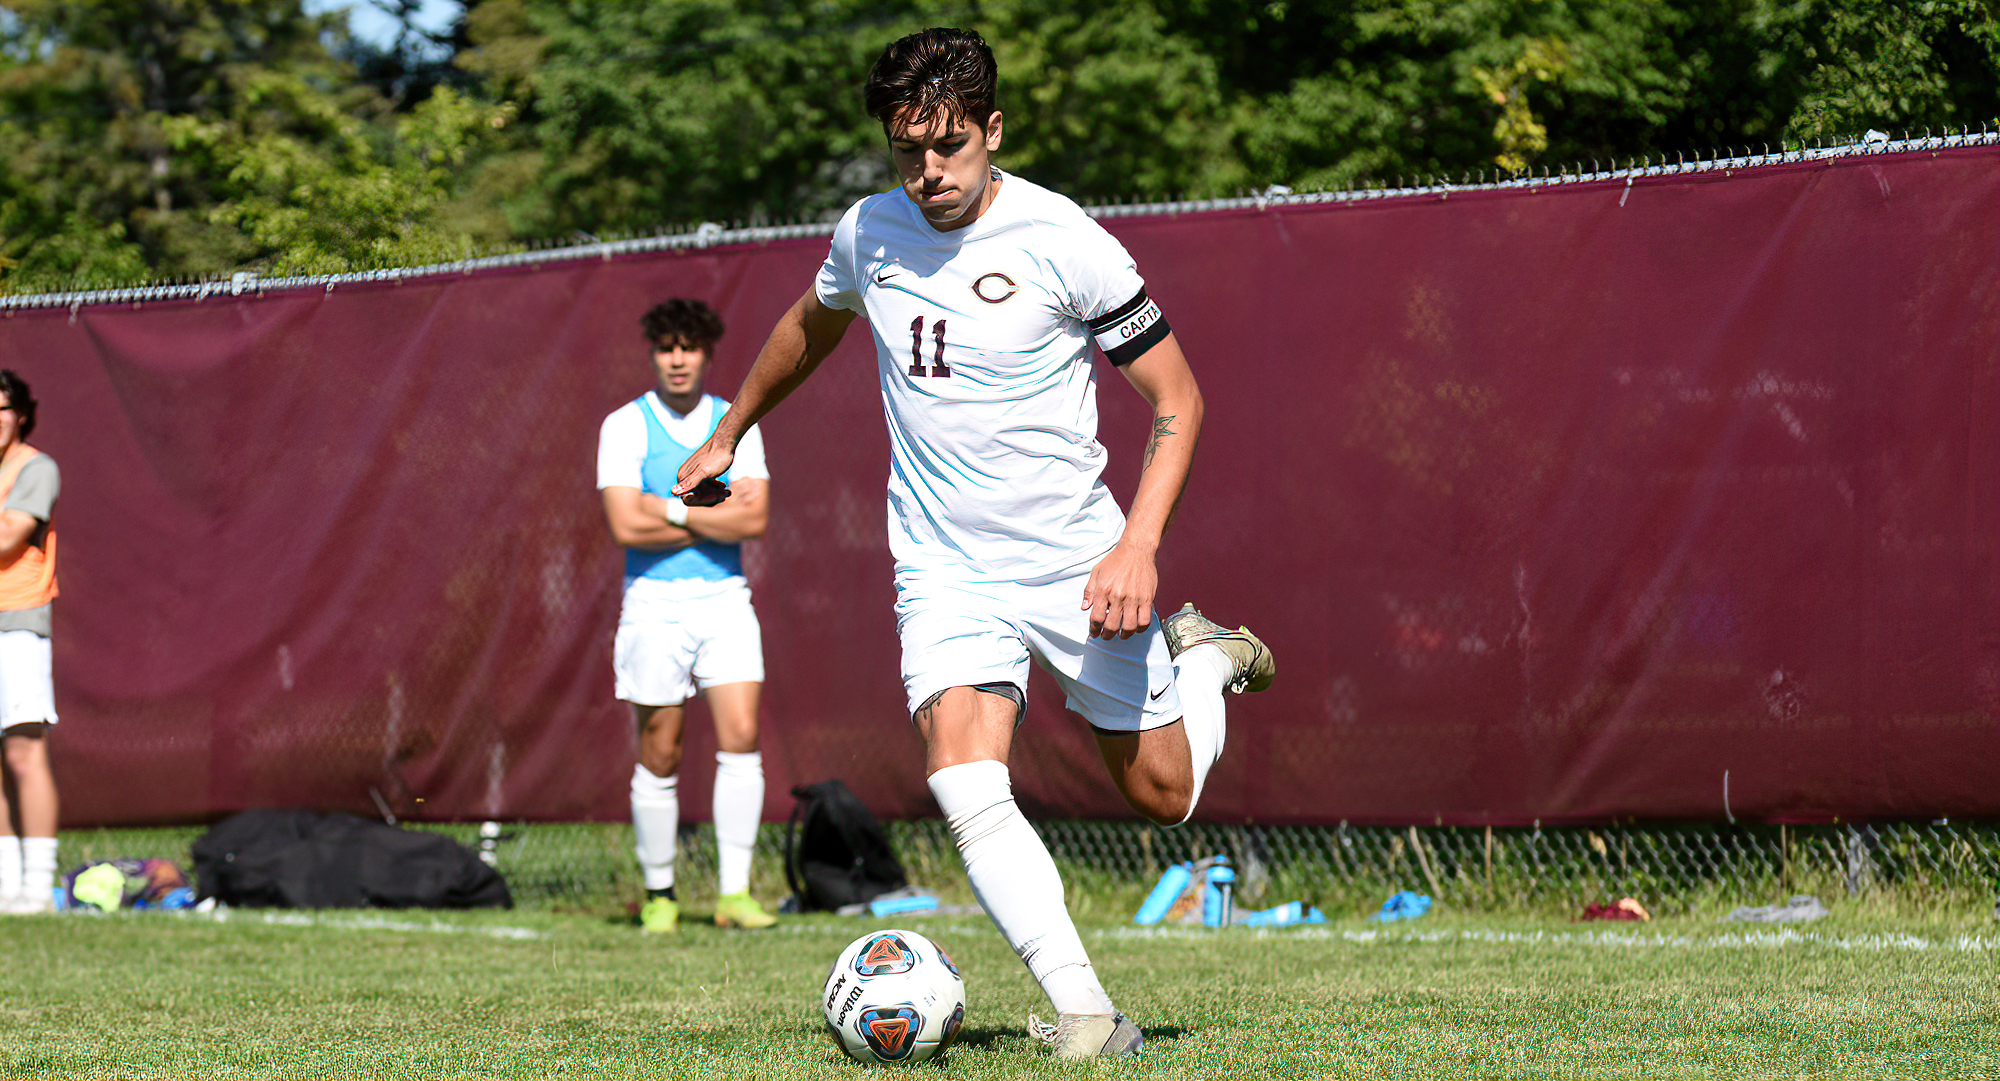 Senior Nate Weaver scored the lone goal for the Cobbers in the MIAC opener at Macalester. The goal was his third of the year and 24th of his career.